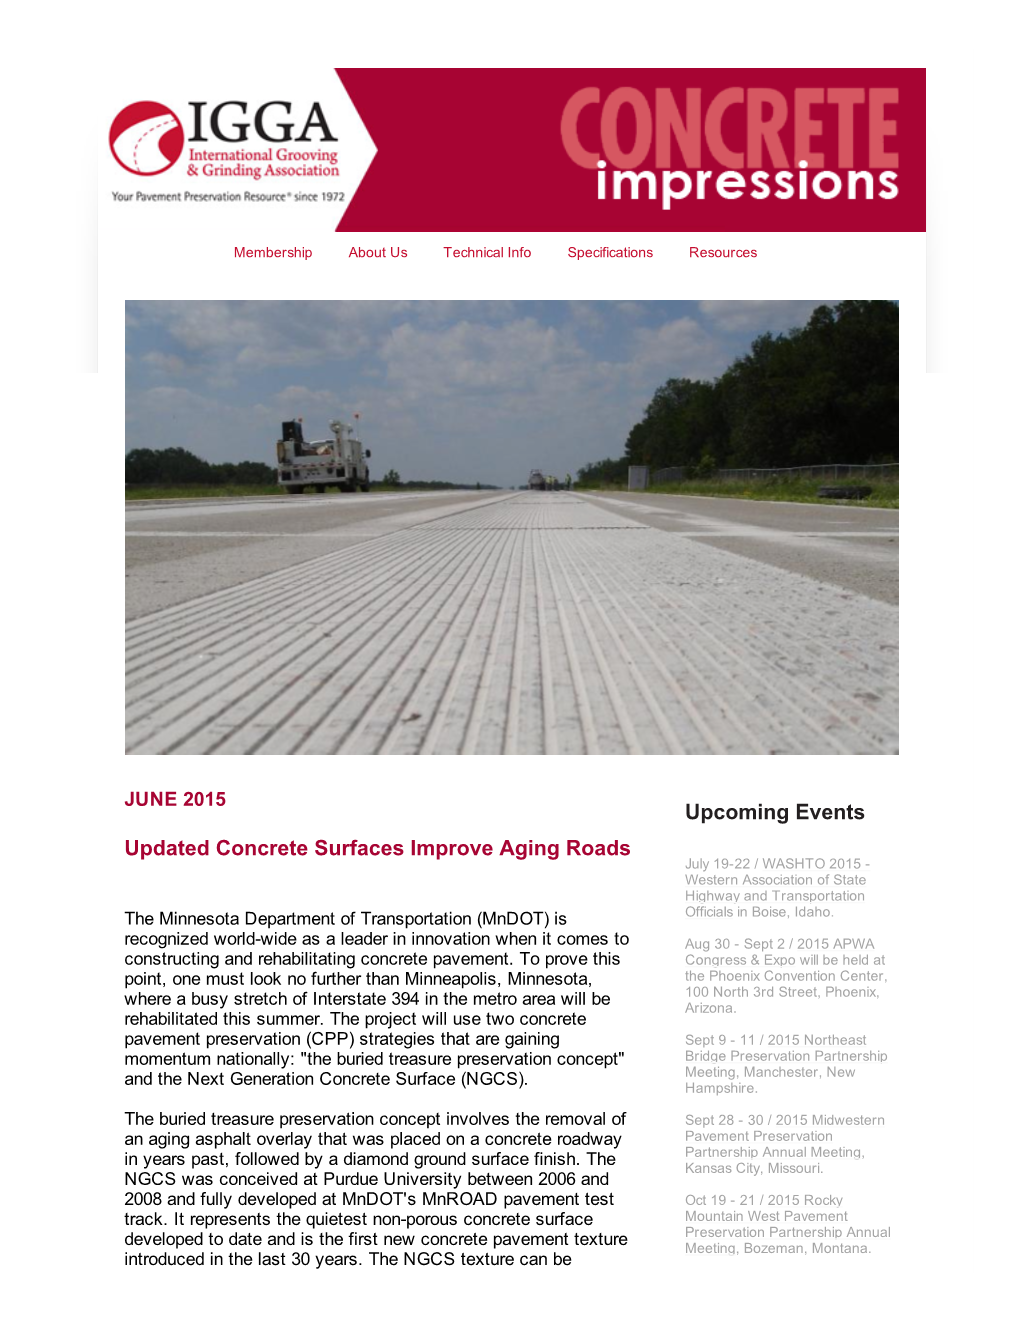 Updated Concrete Surfaces Improve Aging Roads Upcoming Events